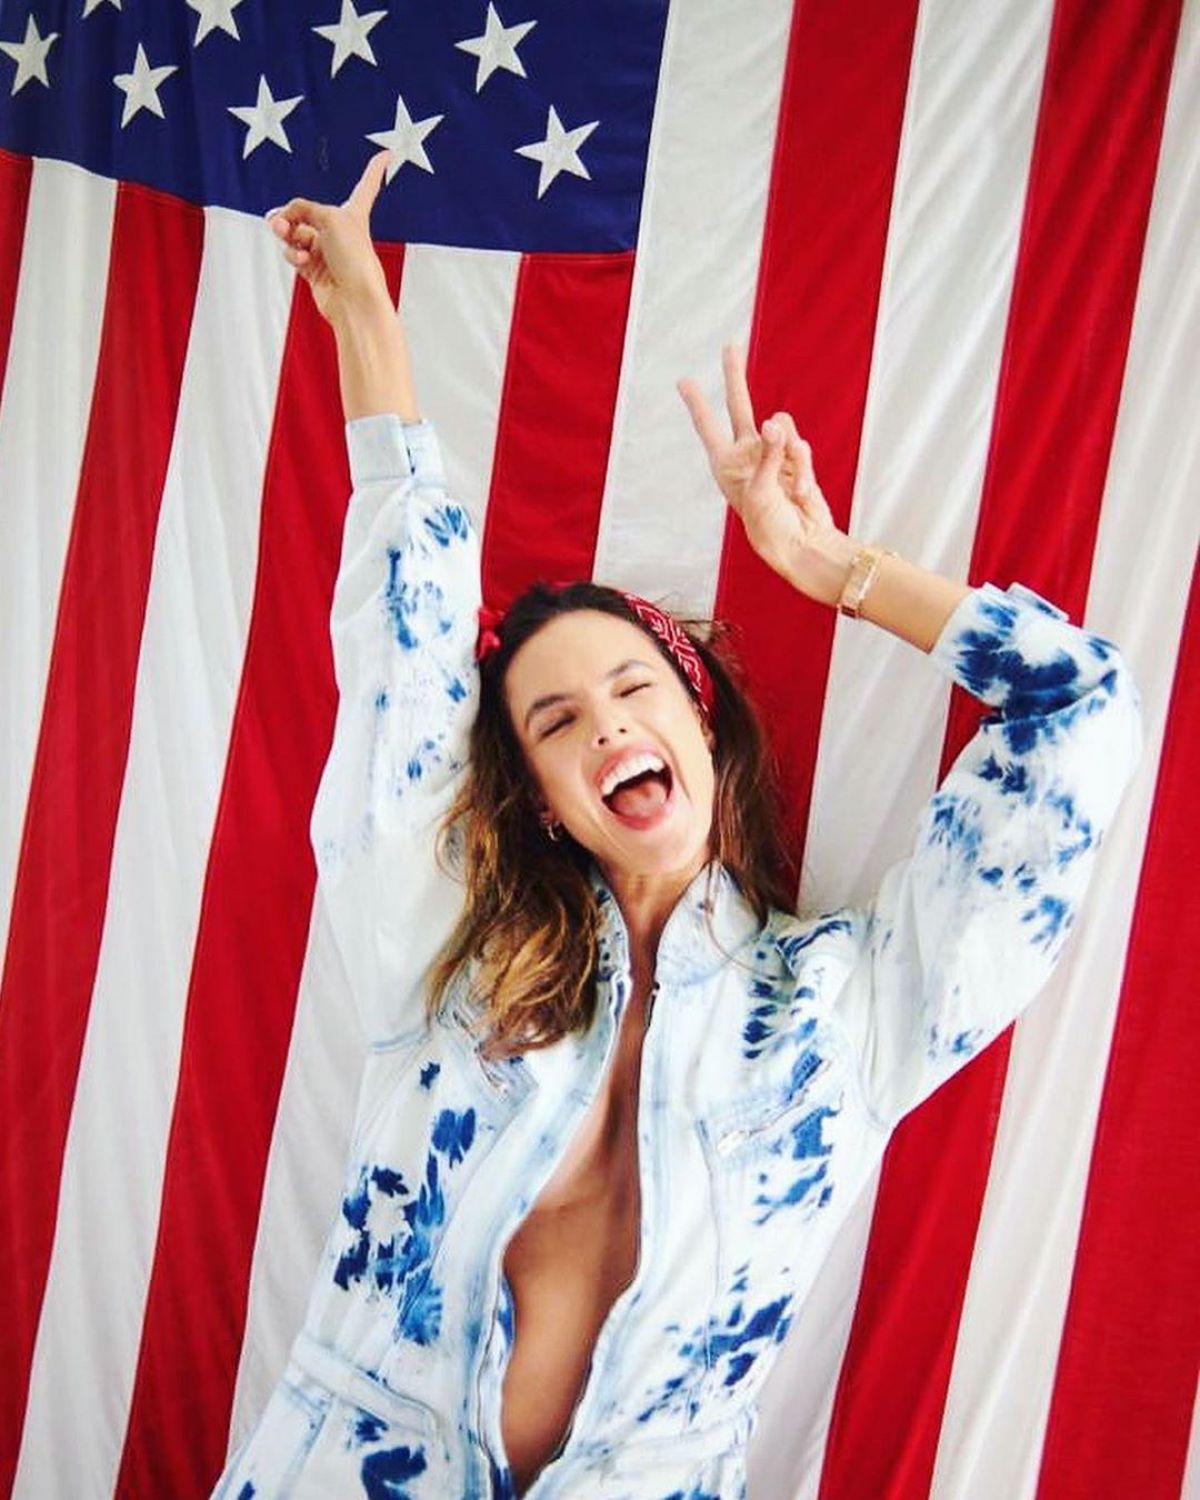 alessandra-ambrosio-independence-day-photoshoot-instagram-pictures-07-04-2019-0.jpg